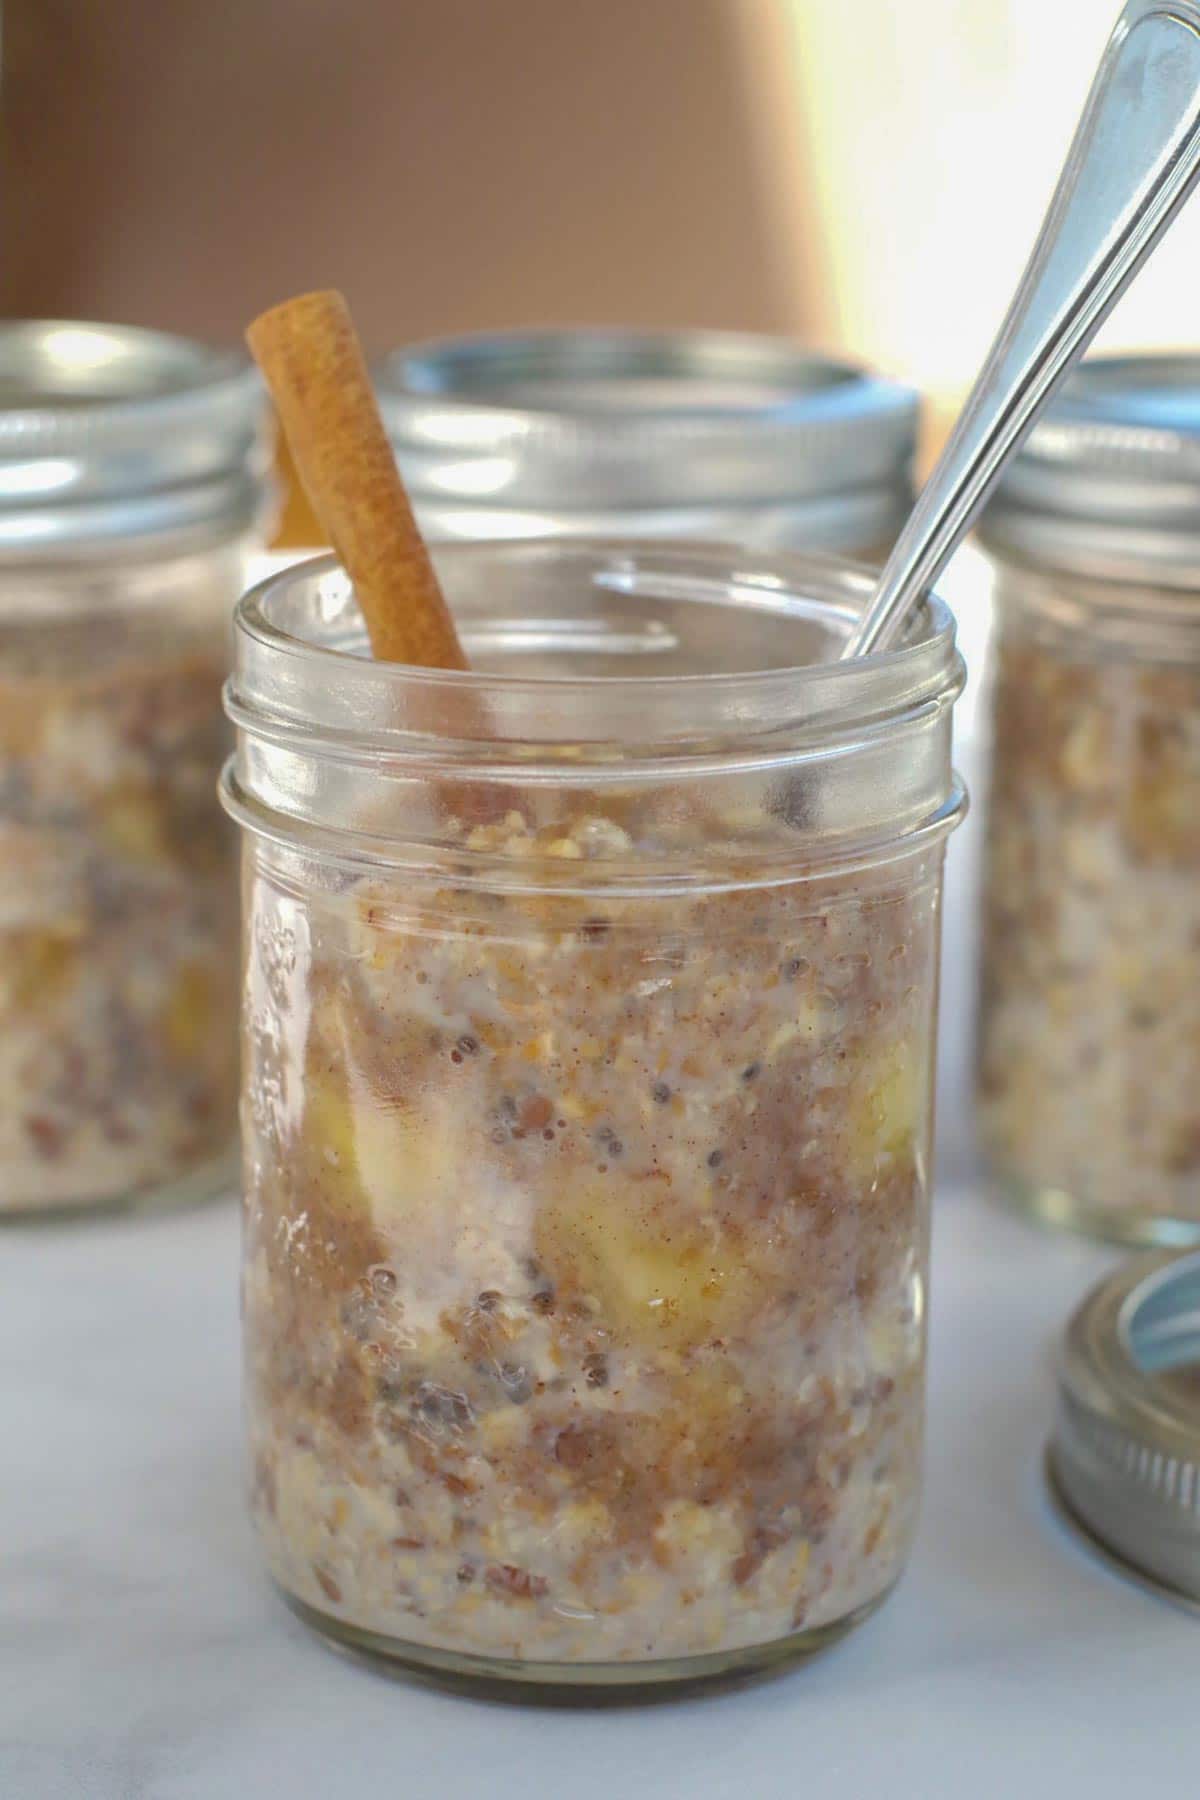 Bananas Foster Overnight Oats in a jar with jars in overnight oats behind